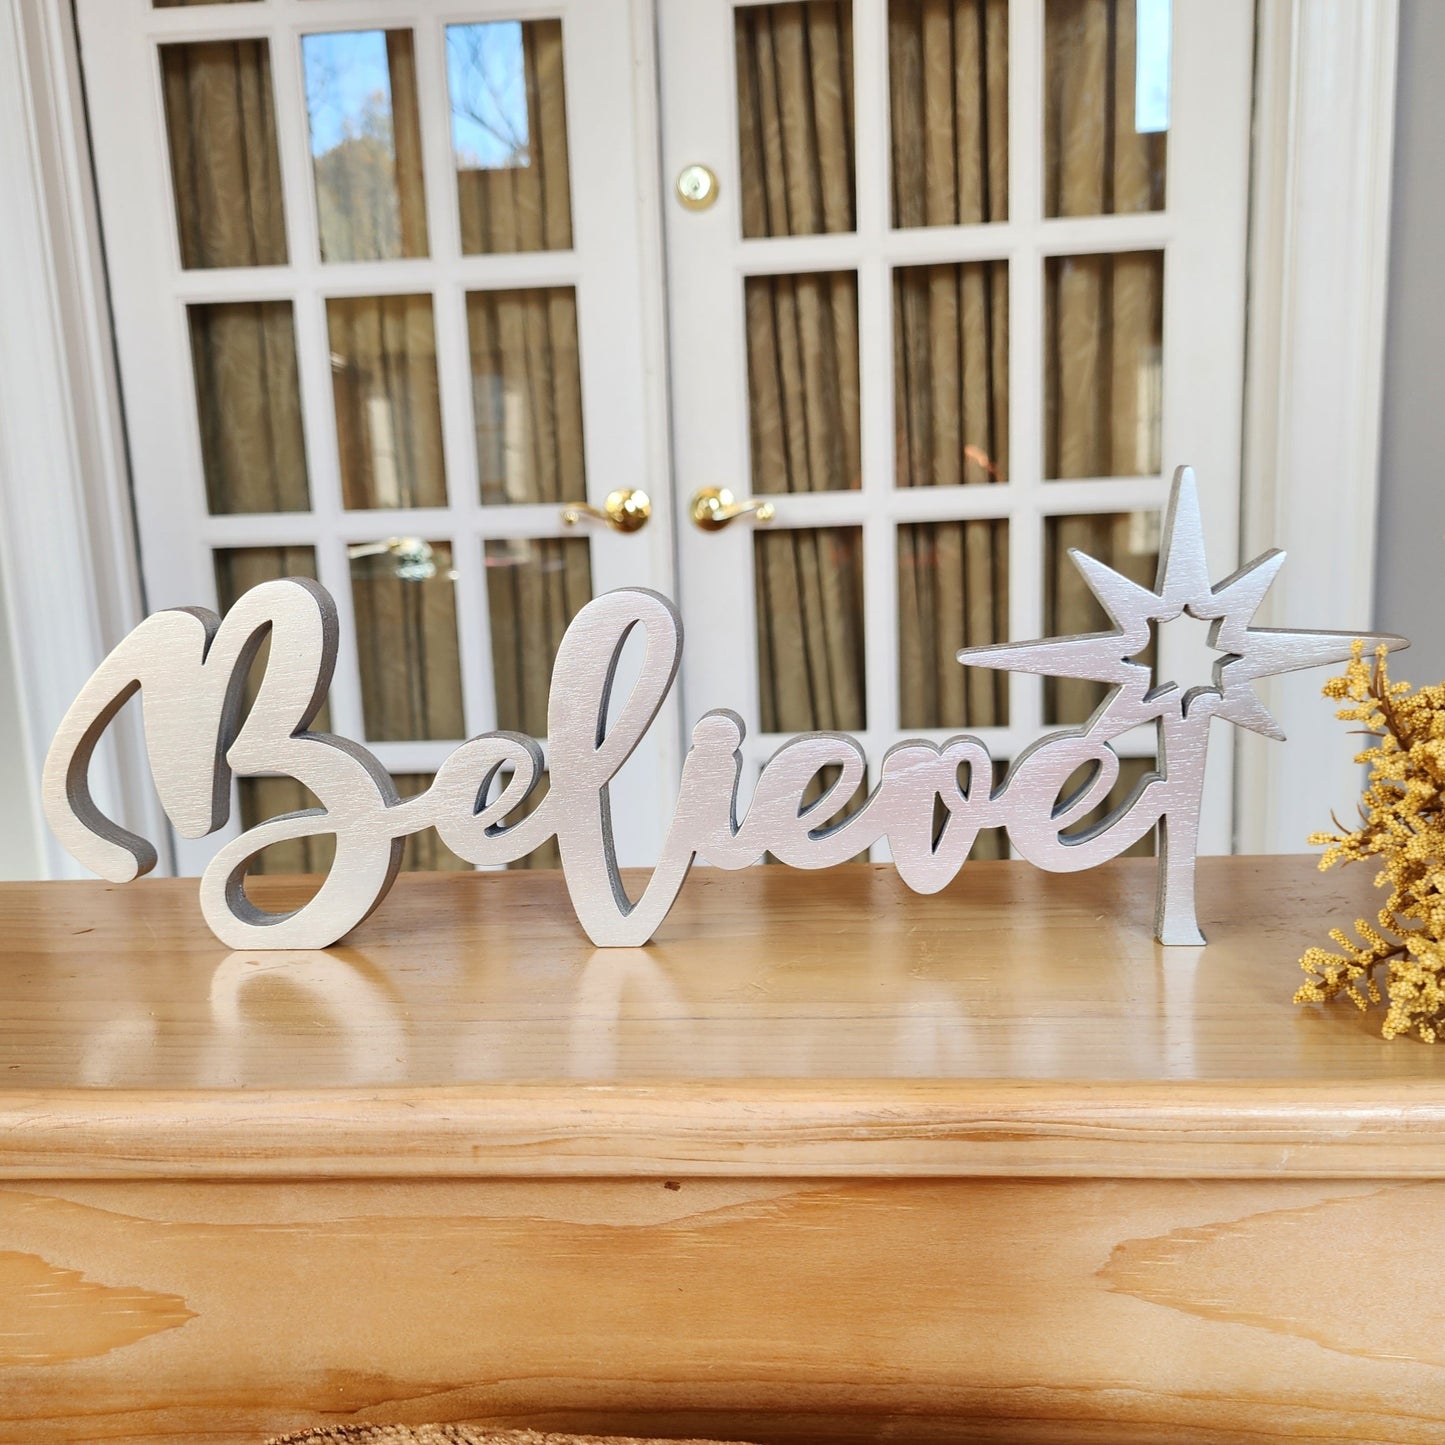 Free-standing wood Believe sign